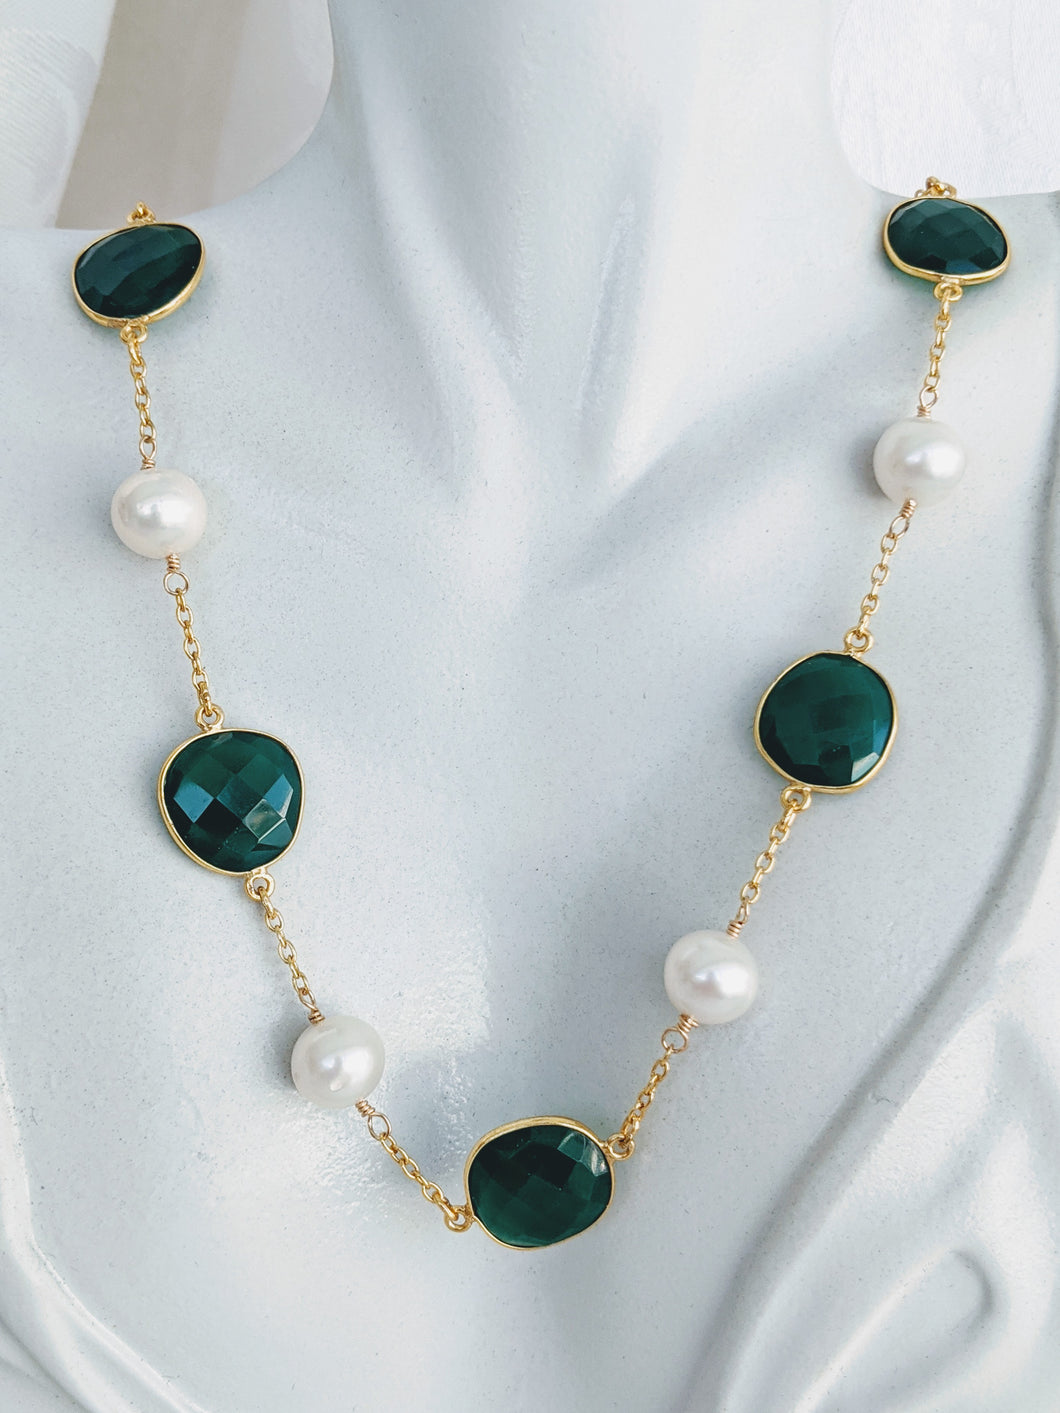 Faceted Green Onyx and cultured freshwater Pearl necklace - see other gemstones